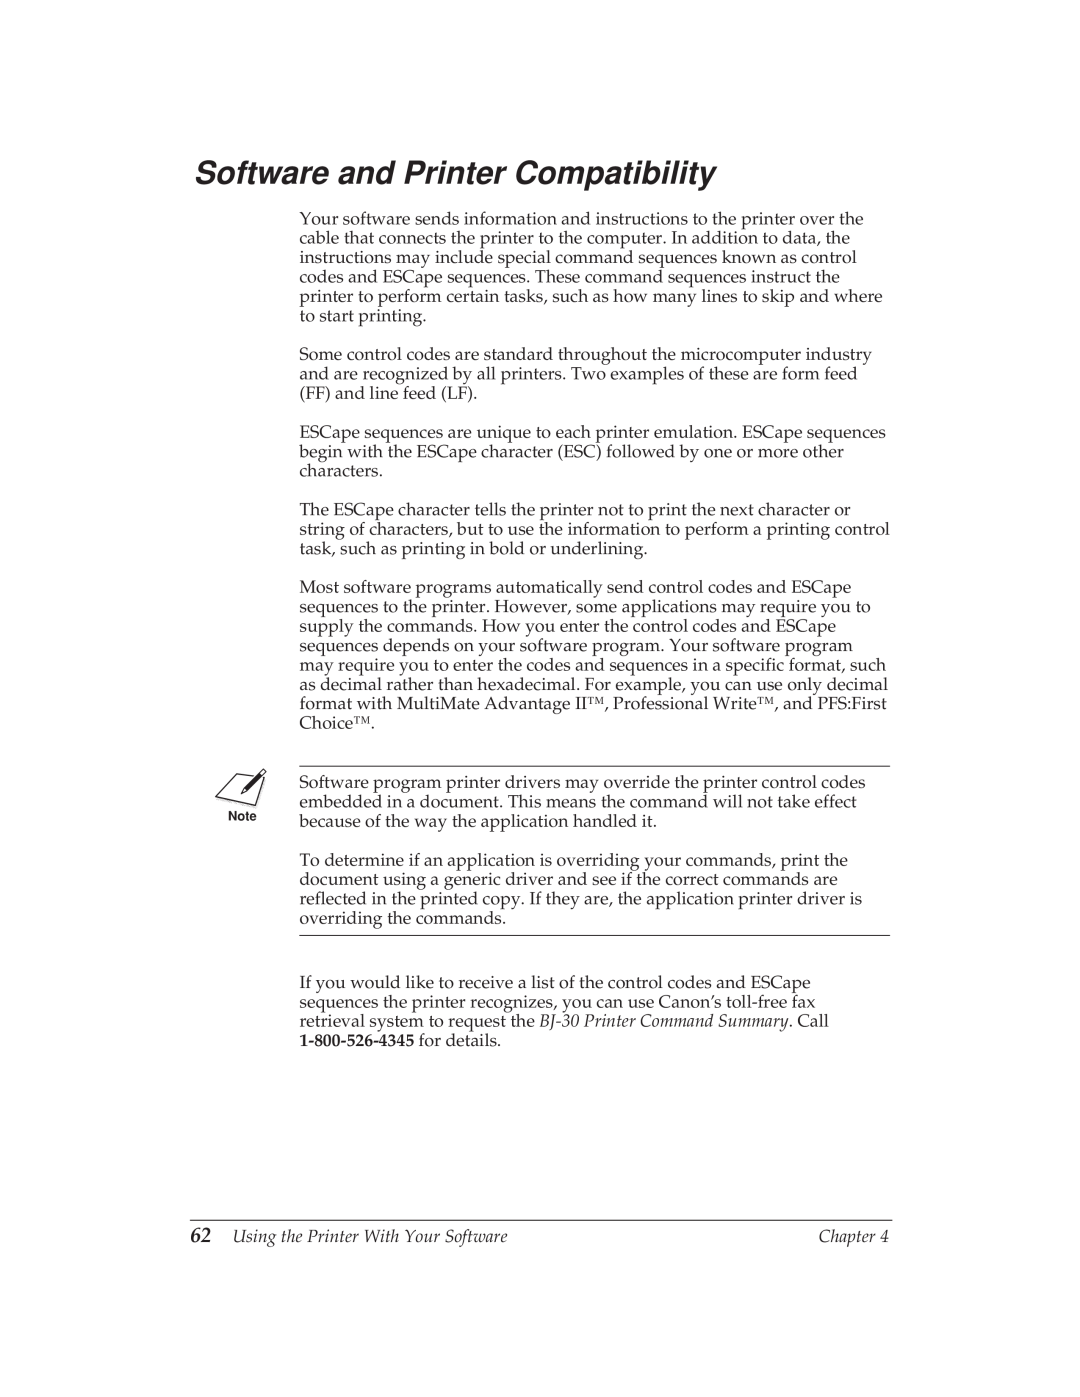 Canon BJ-30 manual Software and Printer Compatibility, Using the Printer With Your Software 